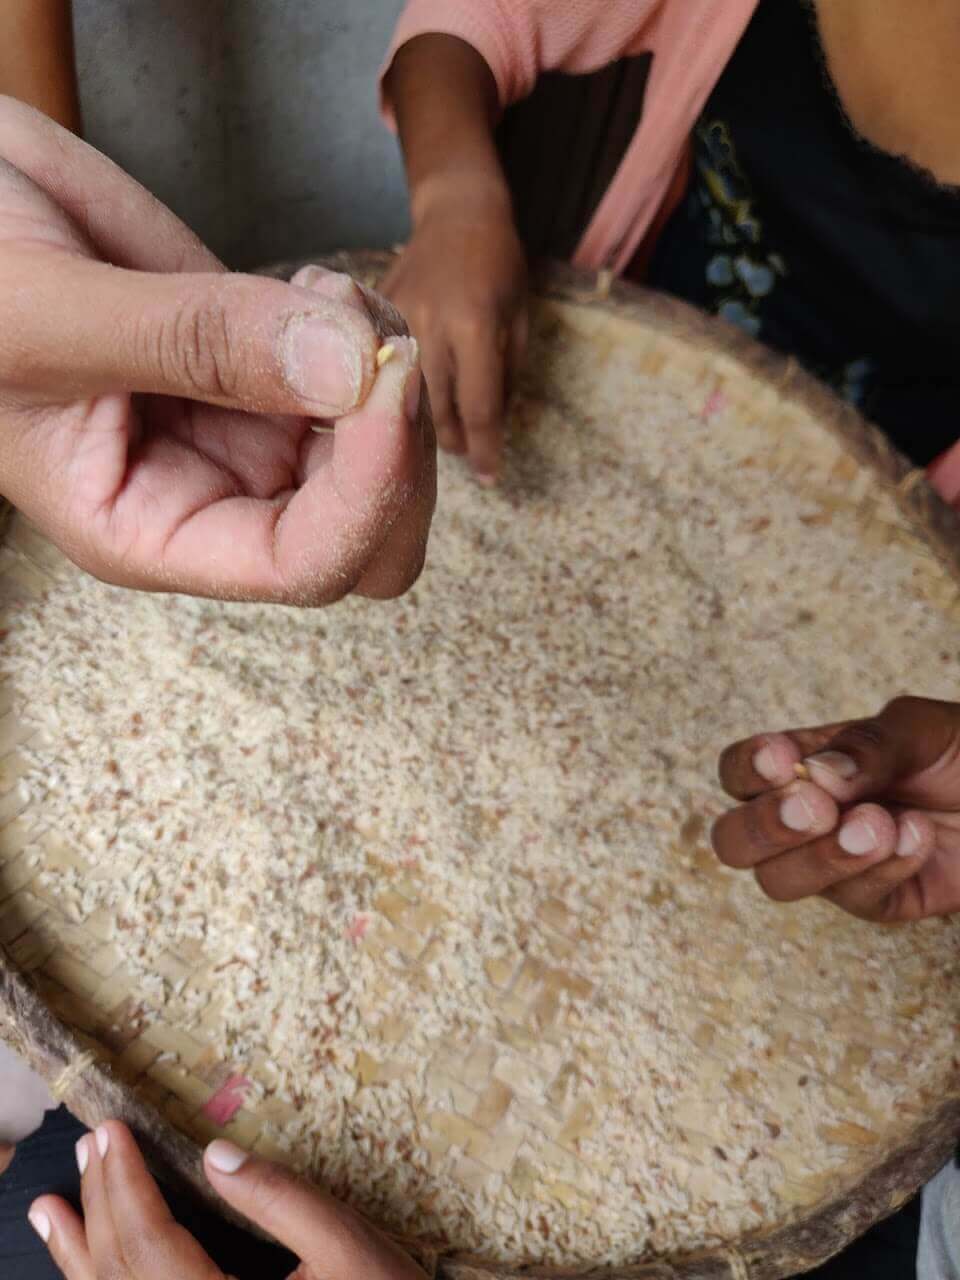 Removing husks from the rice